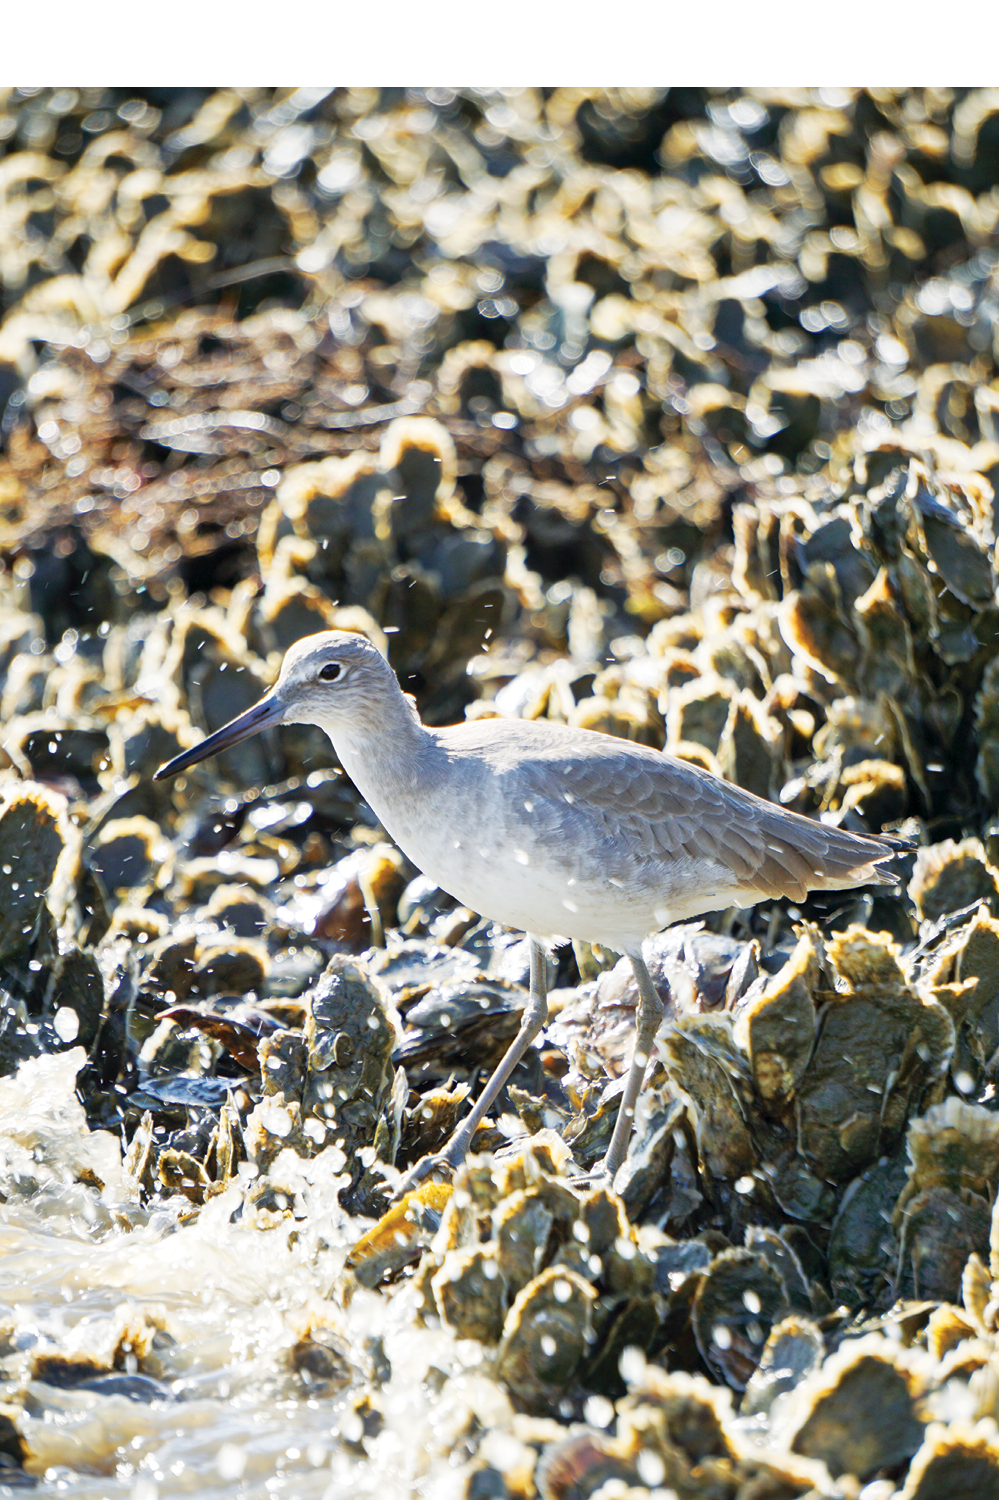  A scavenging willet stays close by, hoping for scraps.<br /> 